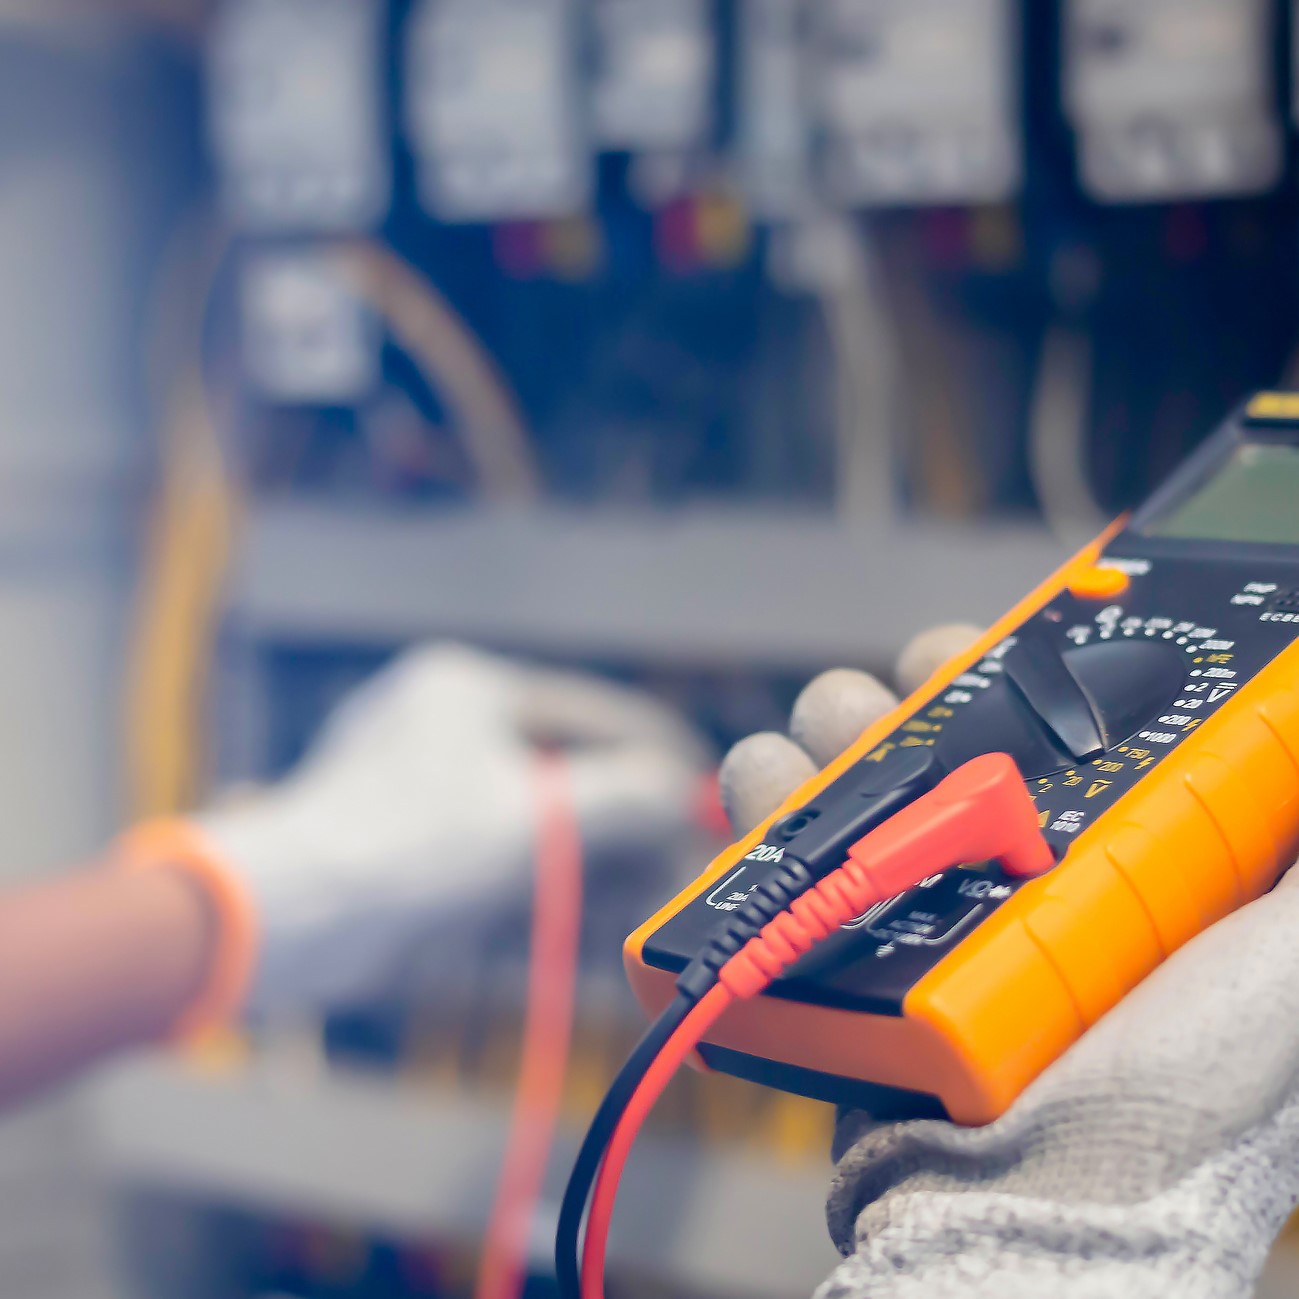 Electrical Safety Checks and Electrical Testing